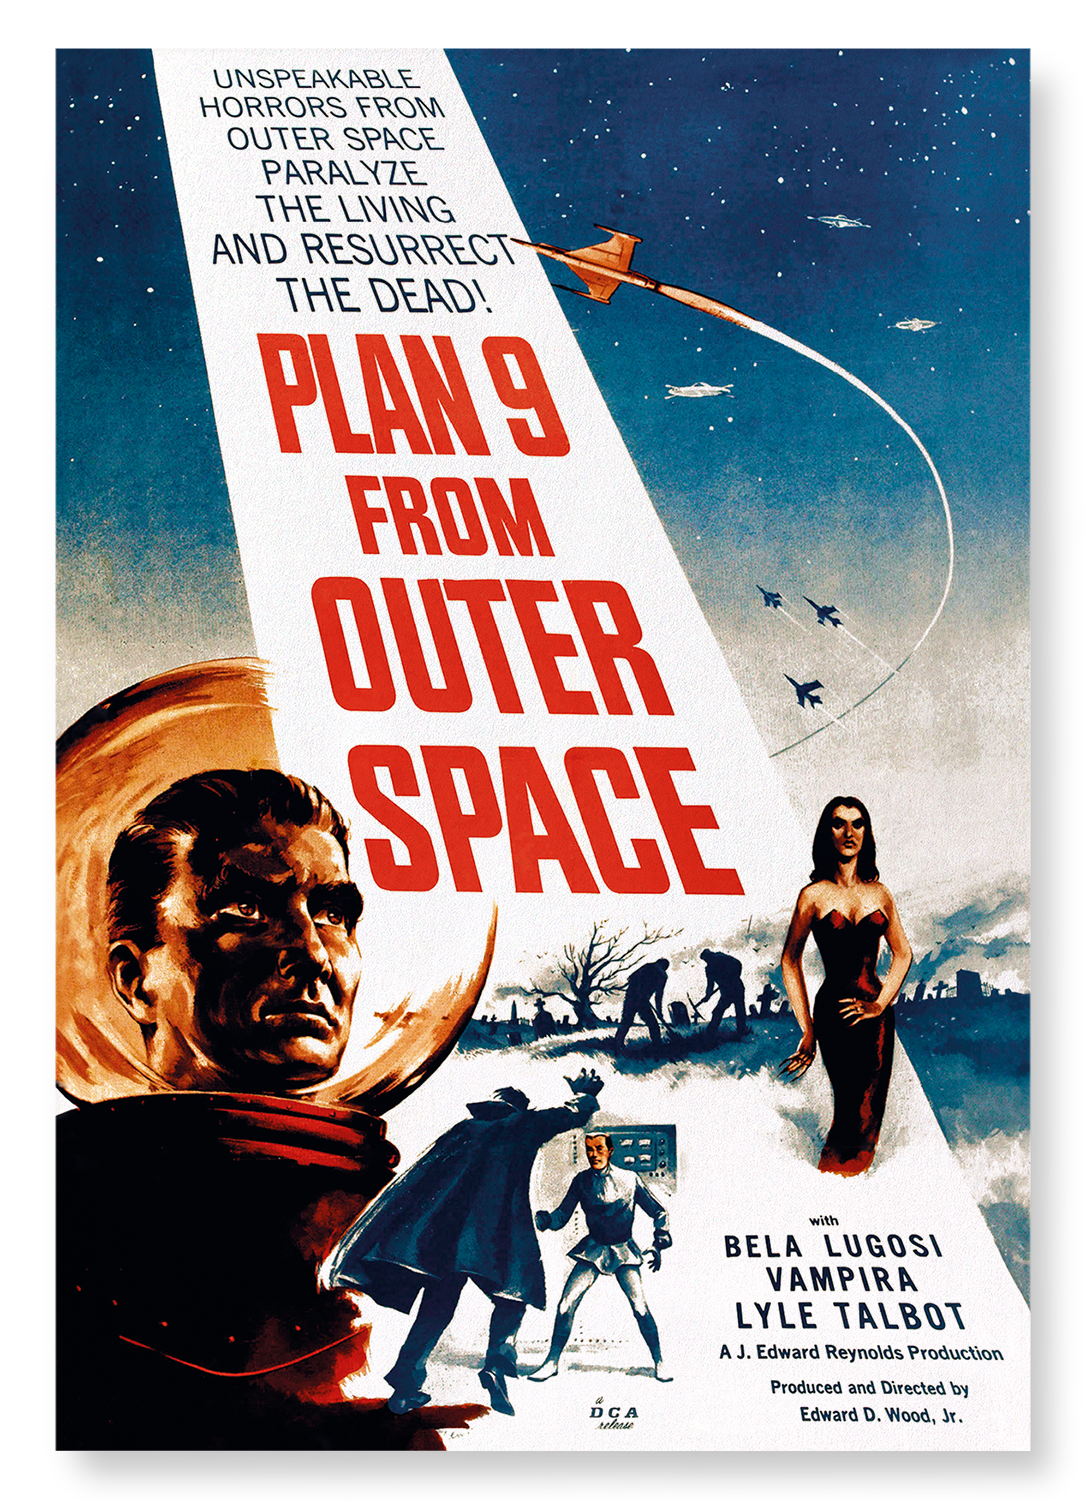 PLAN 9 FROM OUTER SPACE (1959)